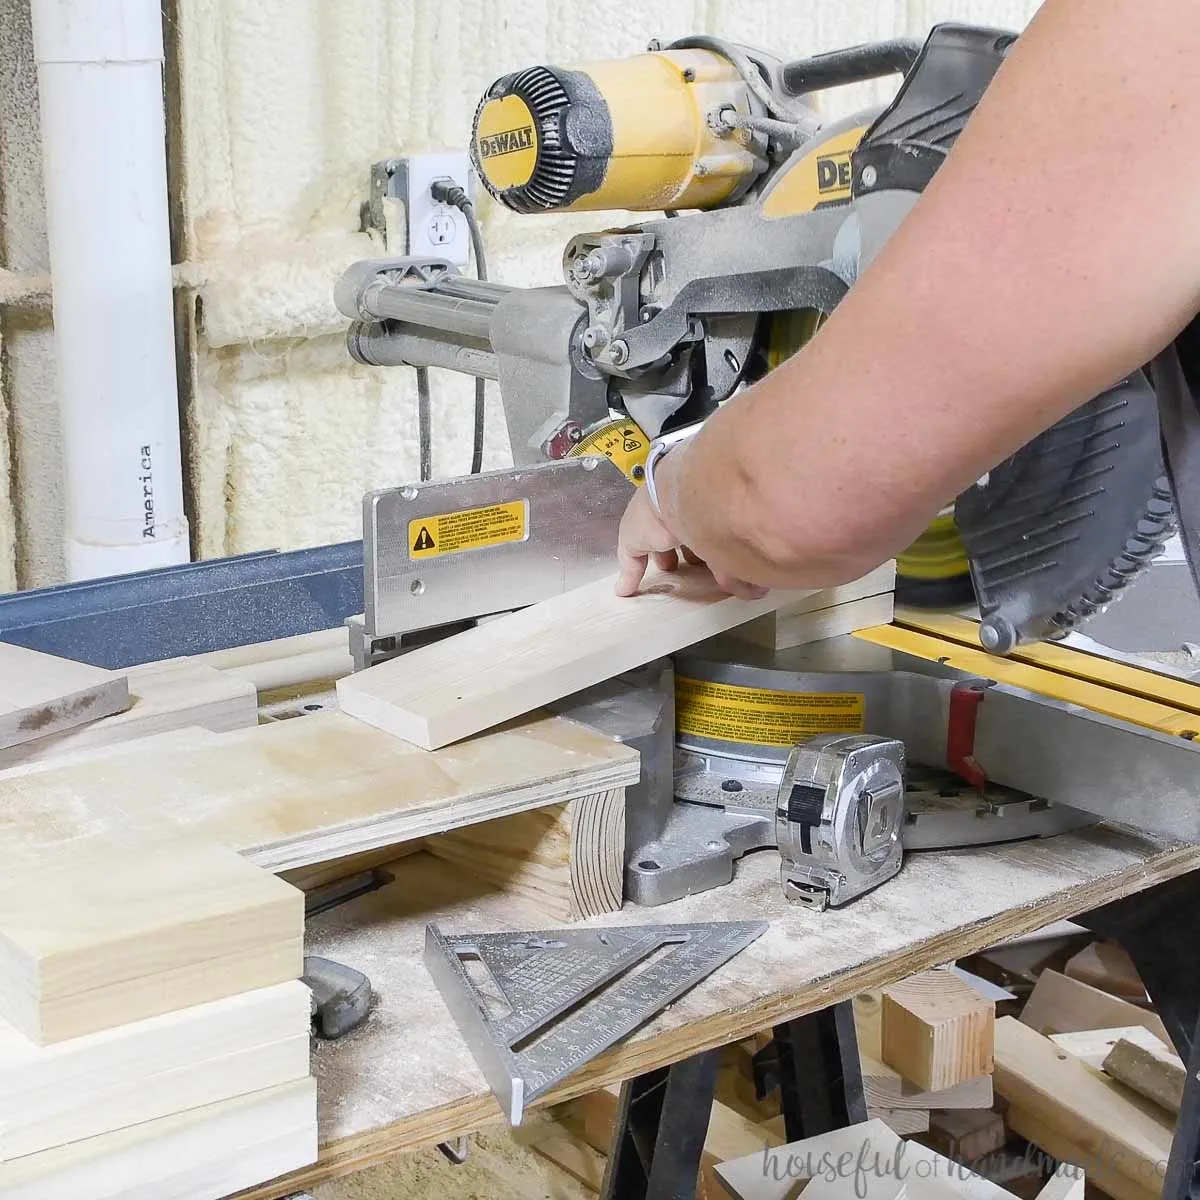 Cutting small pieces of scrap wood on a miter saw using another scrap piece to keep fingers safe. 